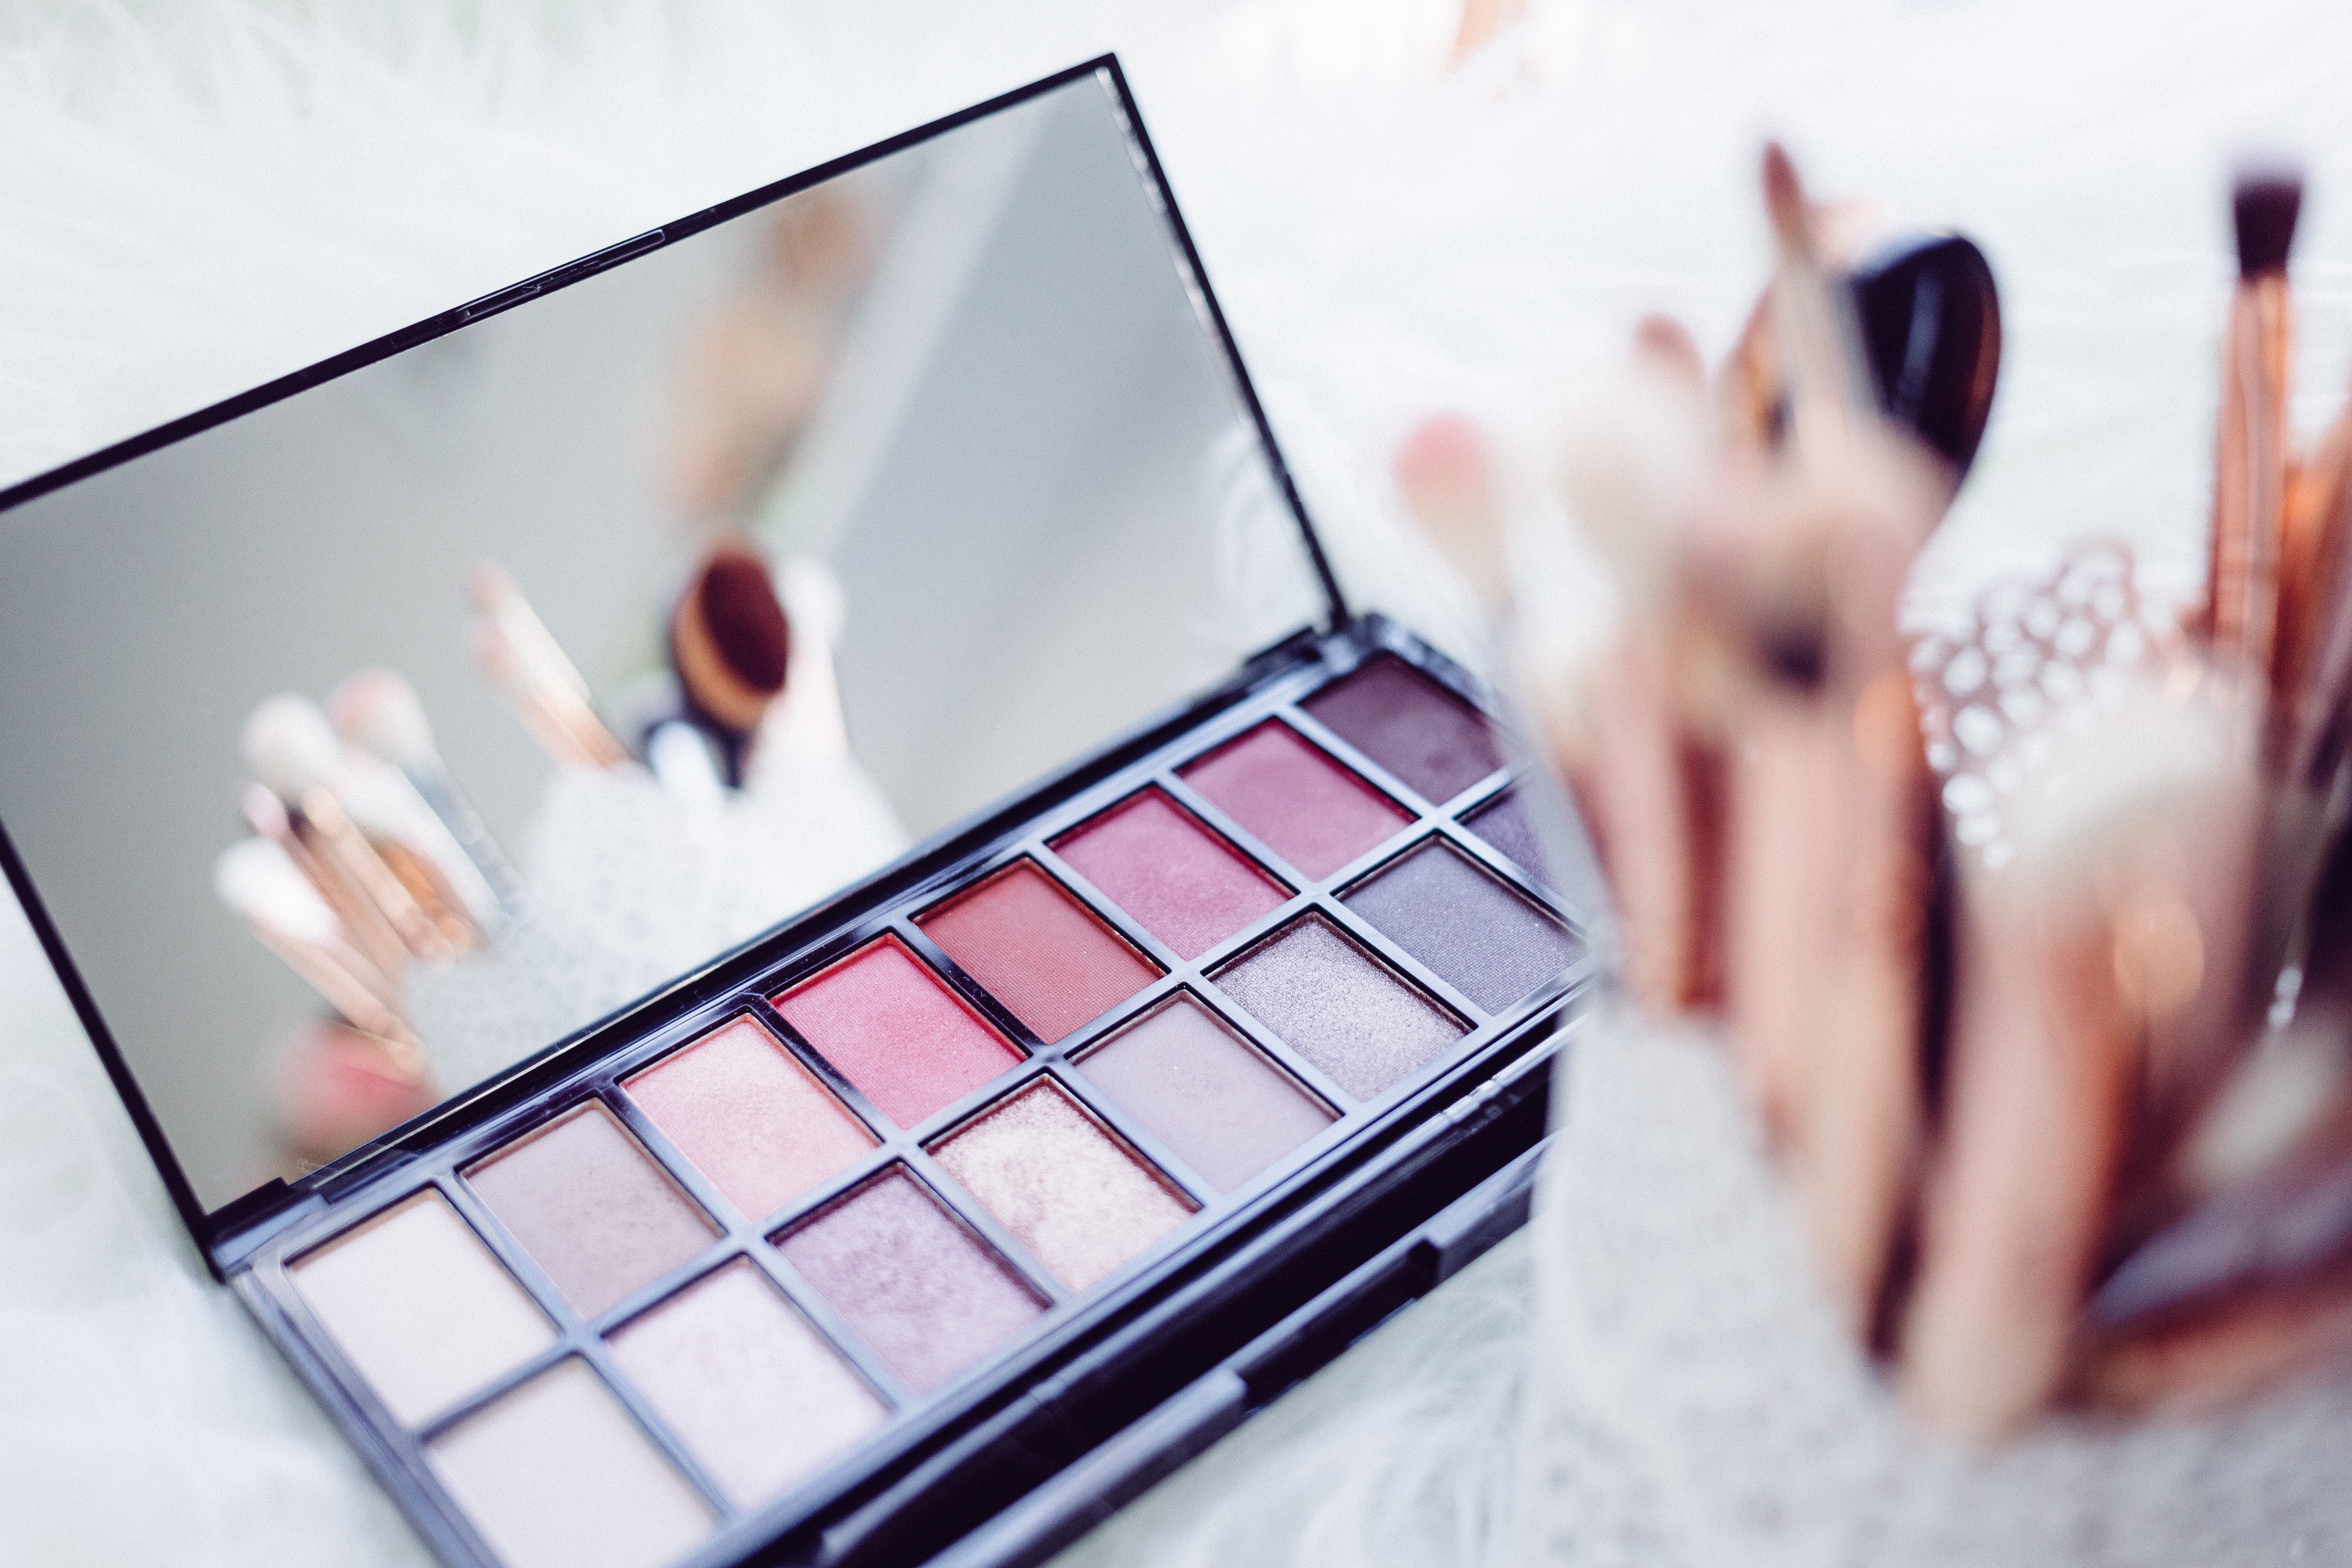 Find Hair And Makeup Artists in   Belconnen Get the best prices from 2,000+ of the most reviewed Hair And Makeup Artists  near Belconnen. Pick from mobile stylists or salons.